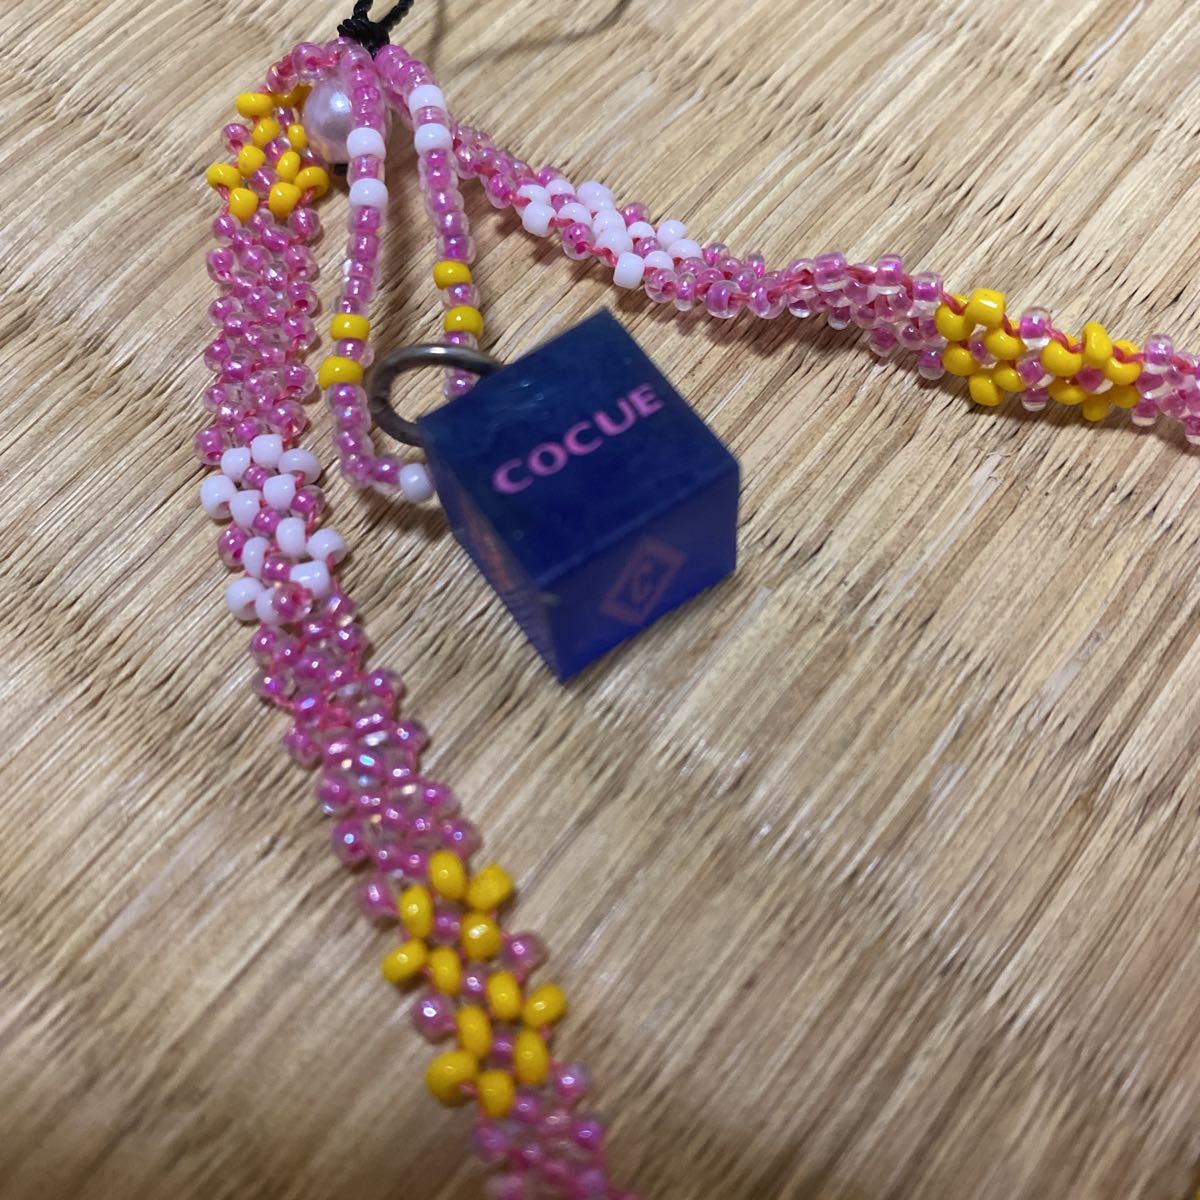  strap COCUE Cocue beads Southeast Asia goods brand 